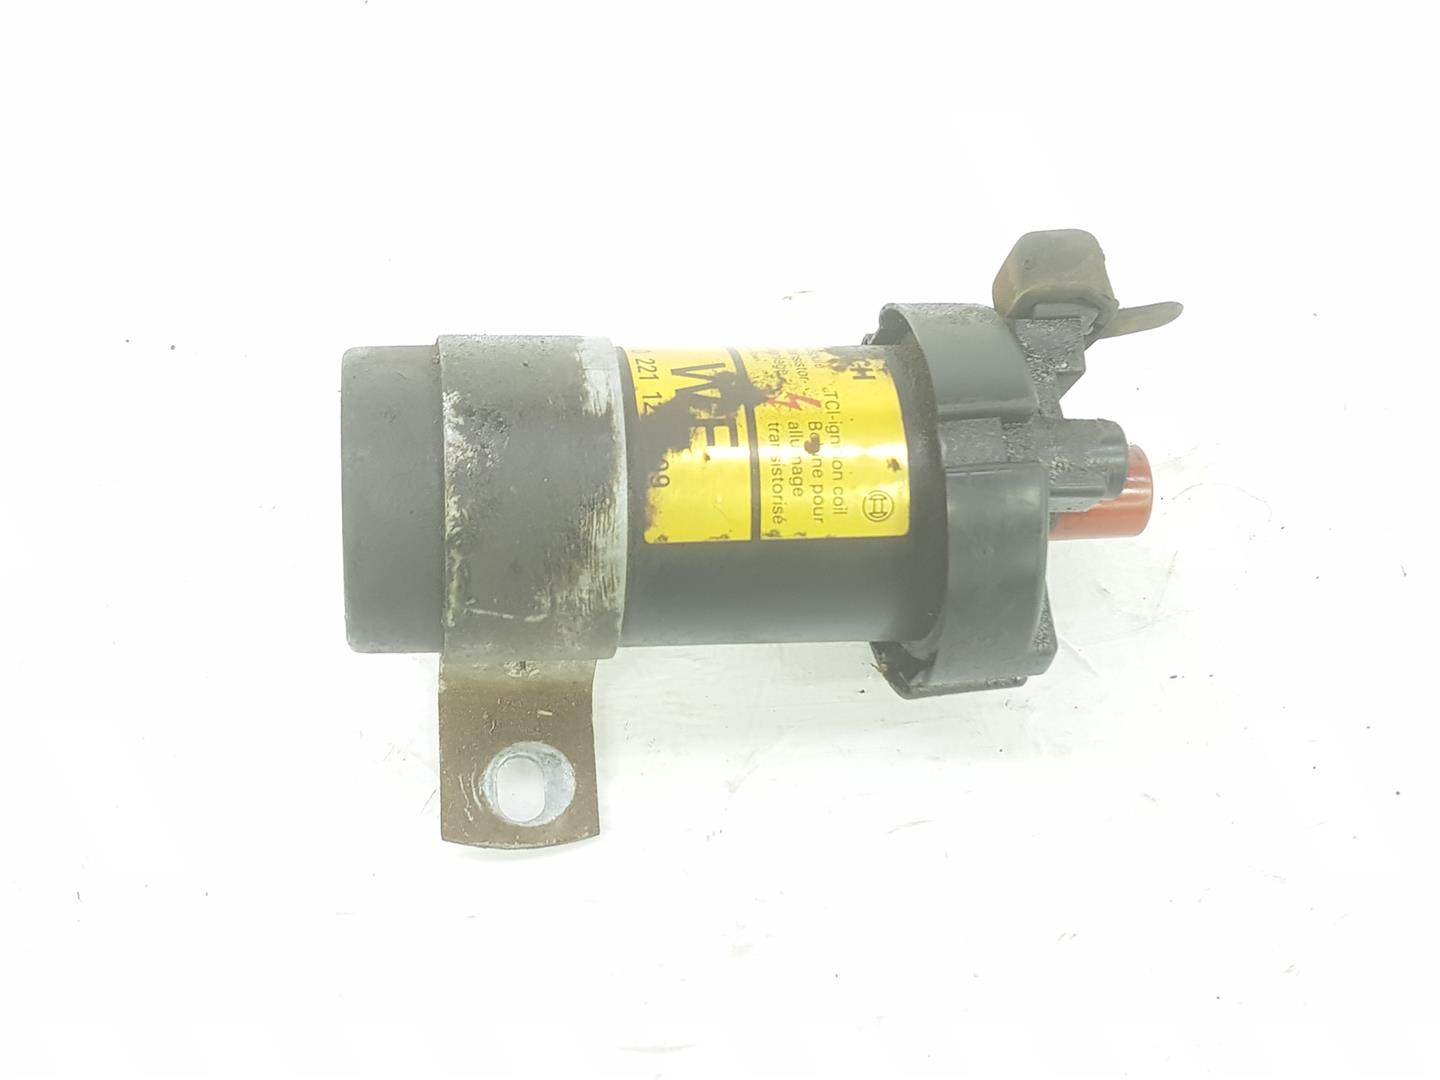 OPEL Calibra 1 generation (1990-2001) High Voltage Ignition Coil 1208053, 0221122409 19921207